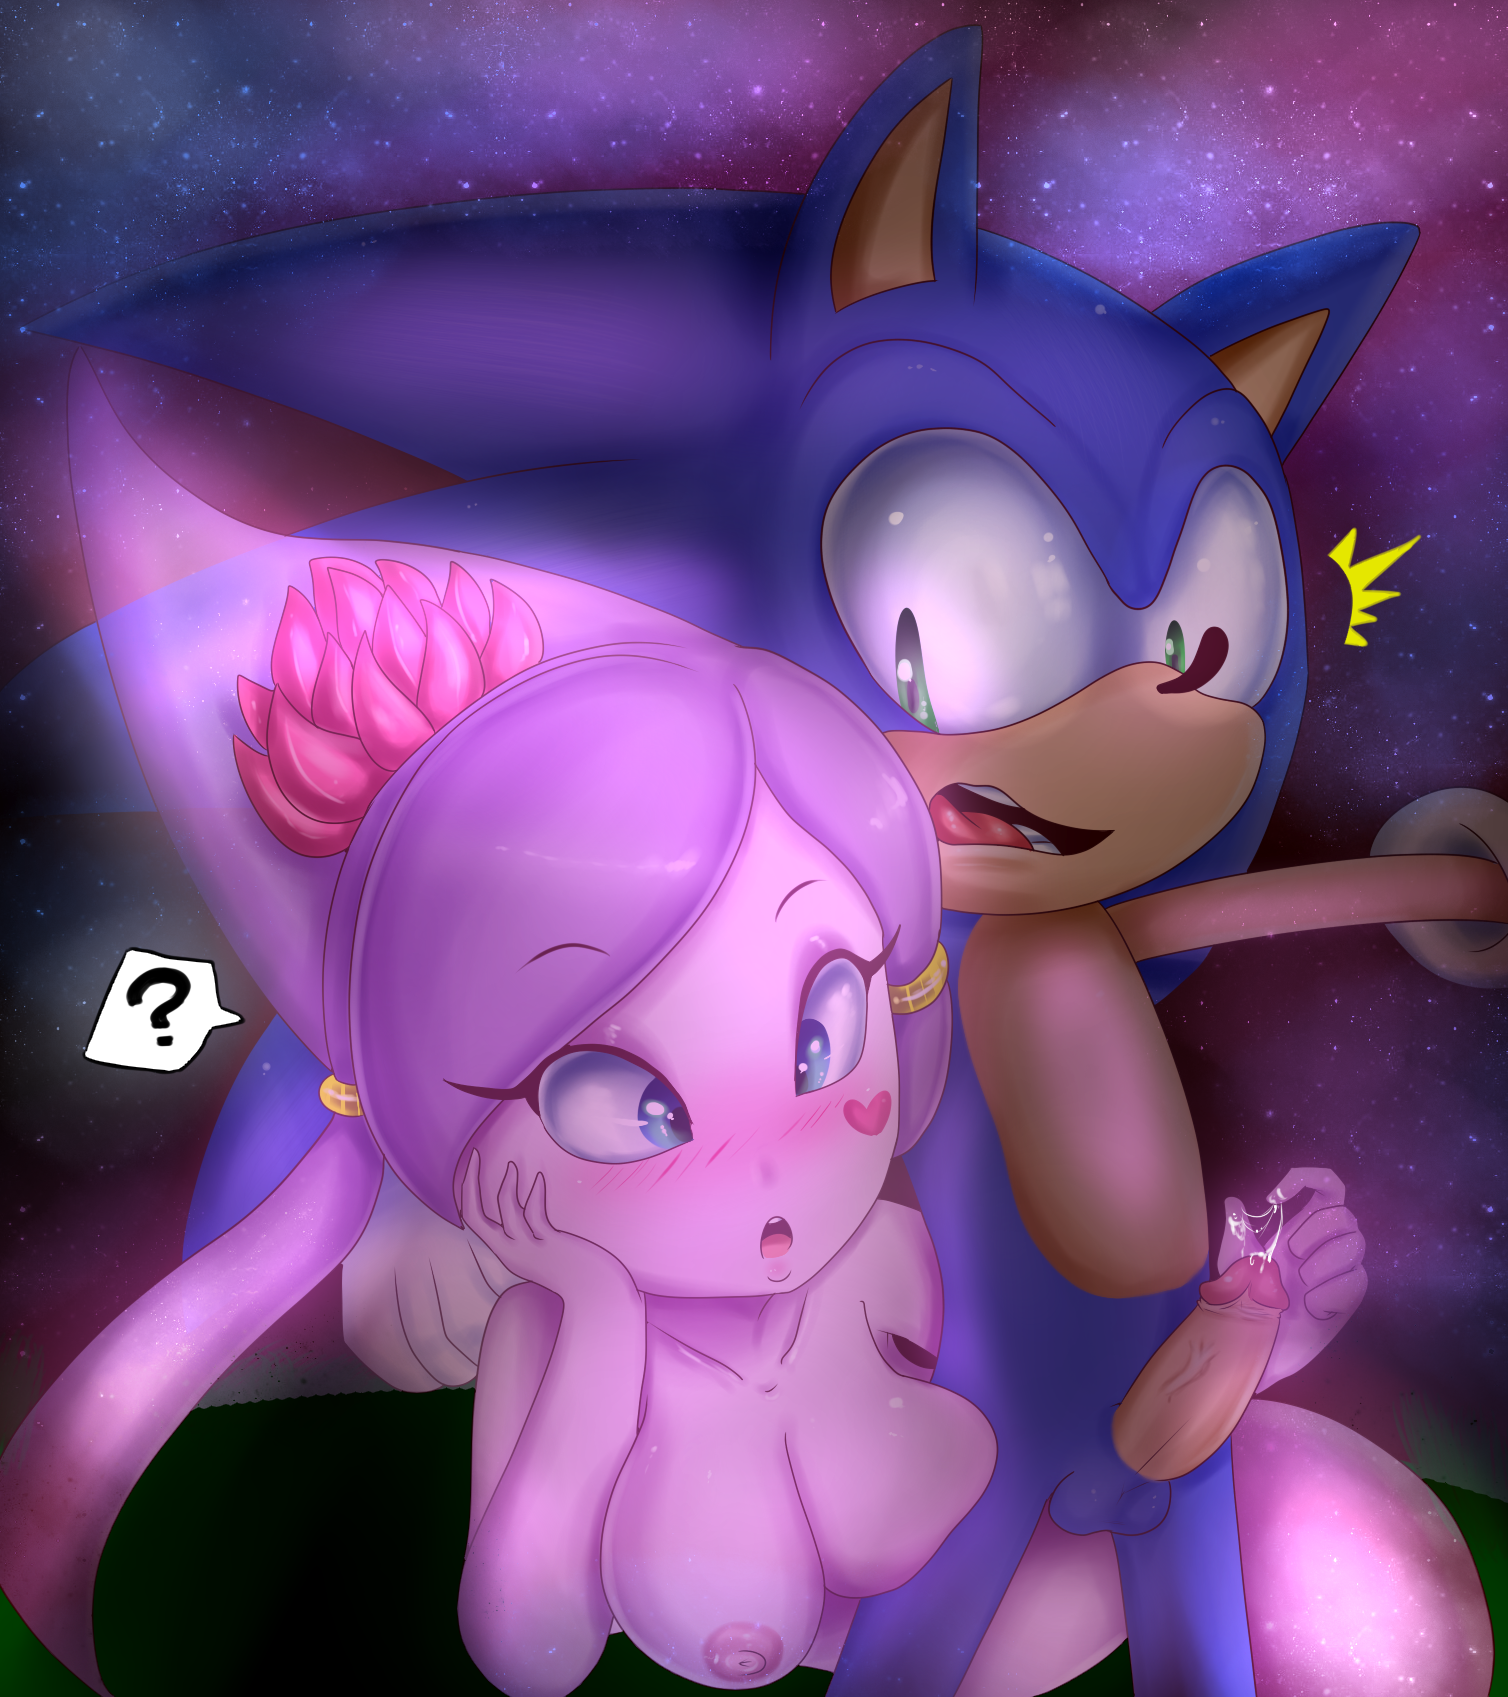 Female Sonic Hentai Porn - Read Sonic the Hedgehog: Lah the Ghost Girl Hent...